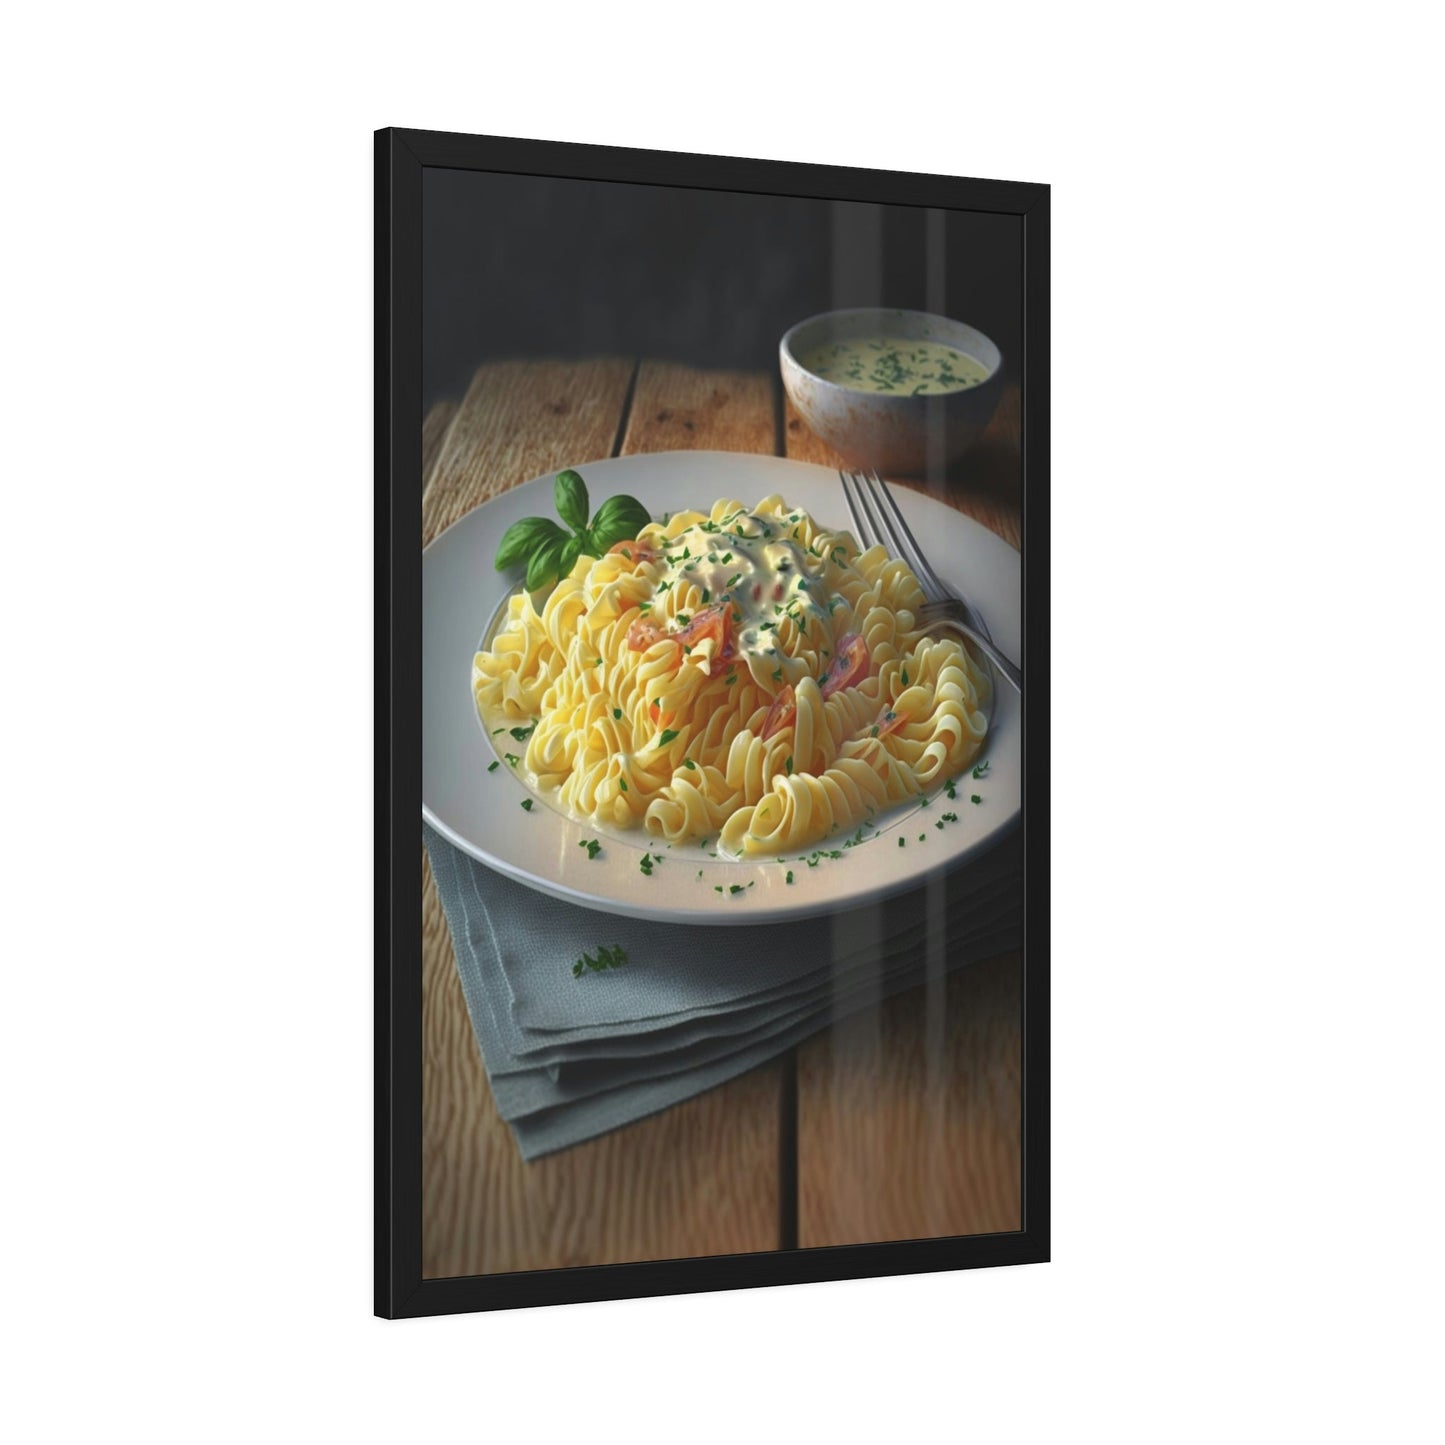 Pasta Lover's Dream: Beautiful Canvas Prints for Your Home